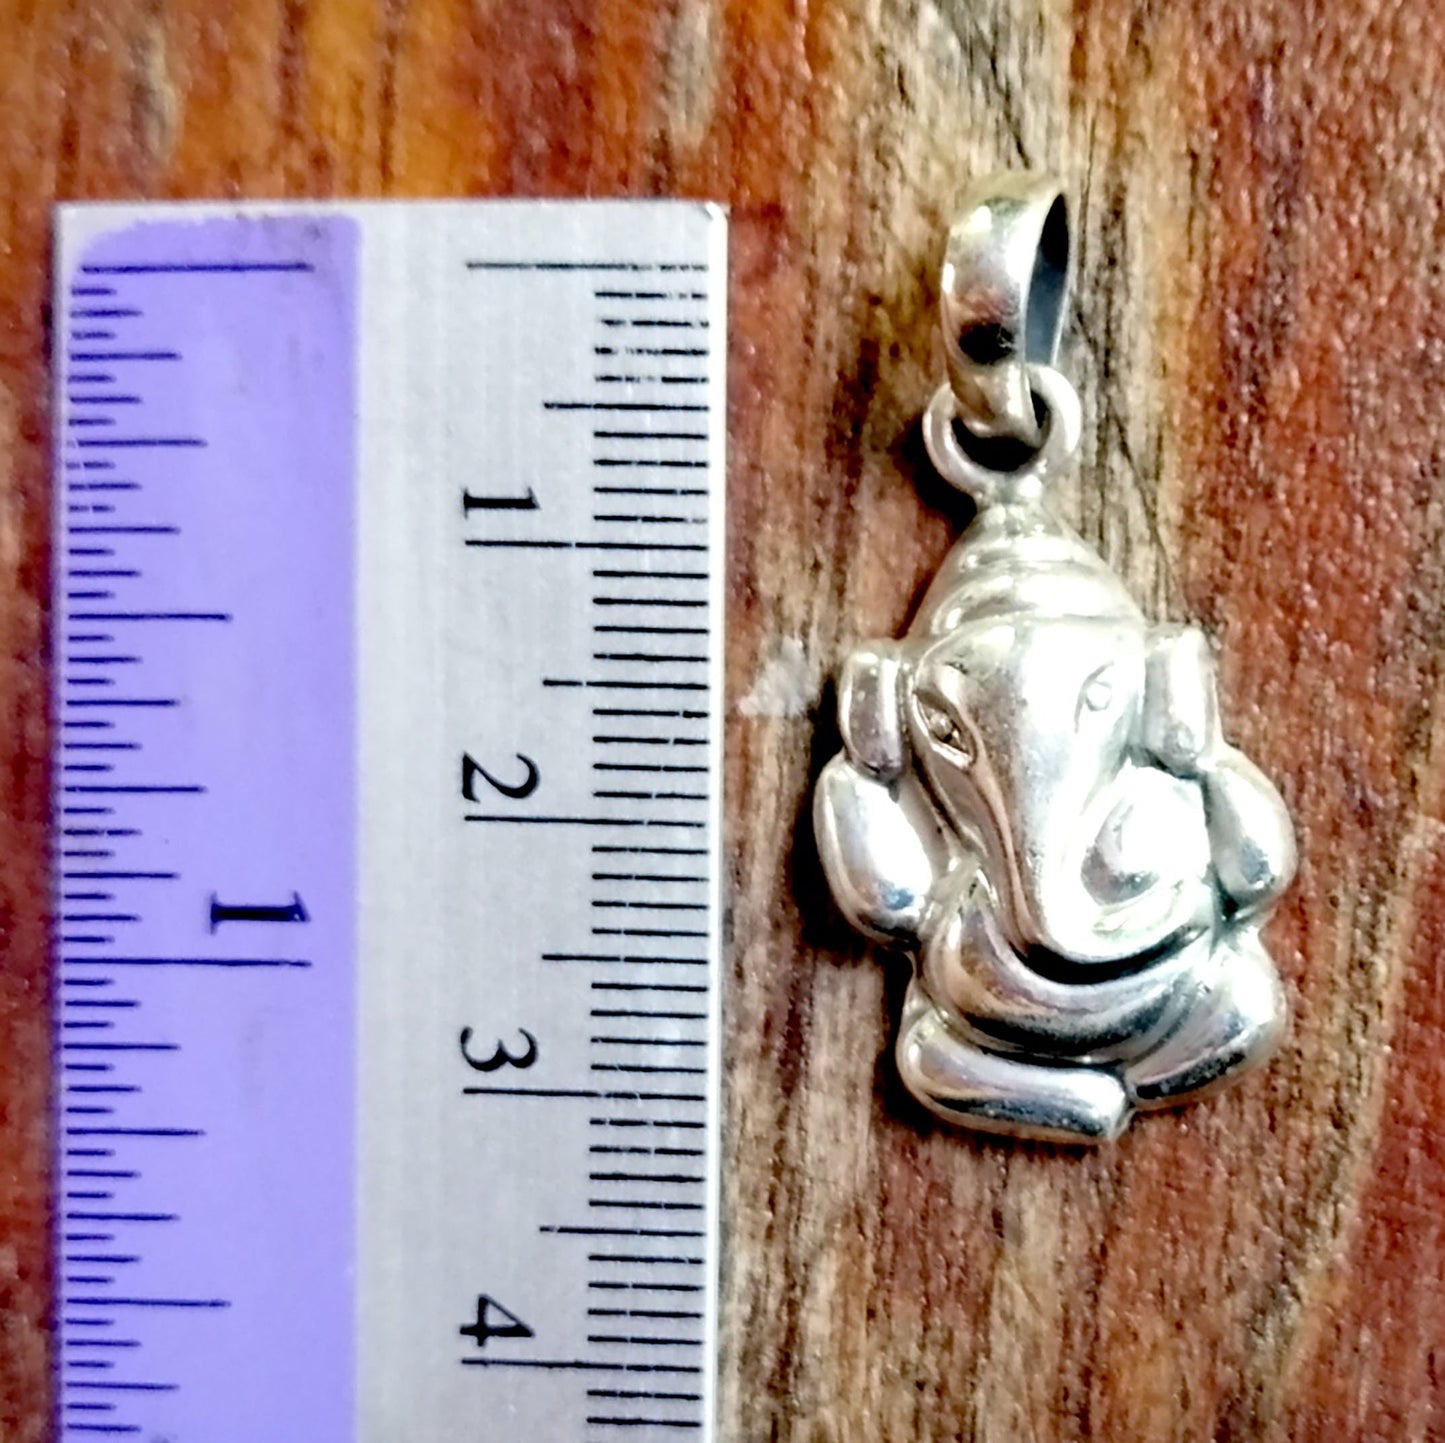 Simplified, Puffy Sterling Silver Ganesh - Lightweight - Super cute! | Overcome Obstacles | New Beginnings |